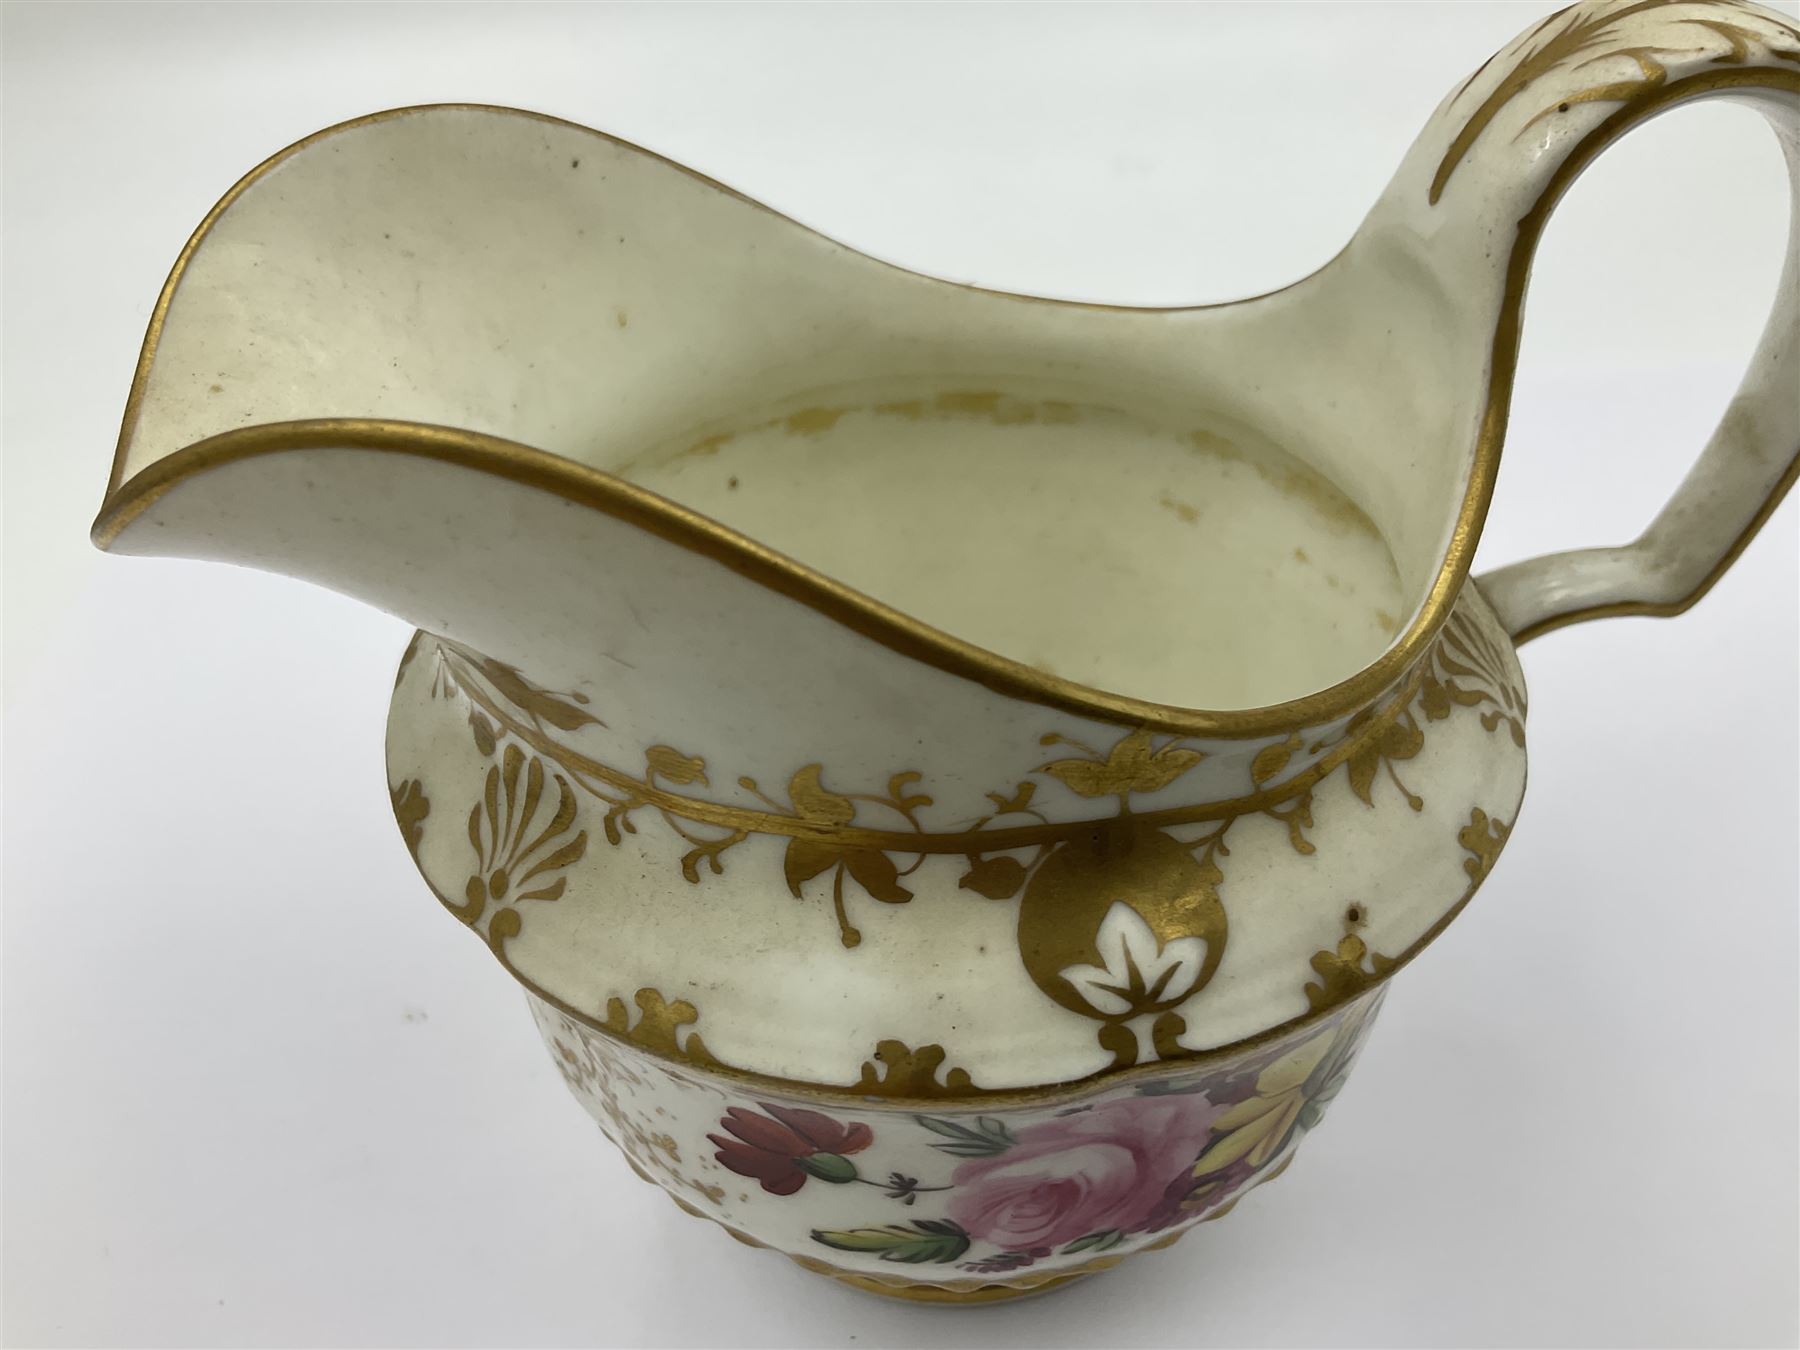 19th century Thomas Goode and Co jug - Image 3 of 22